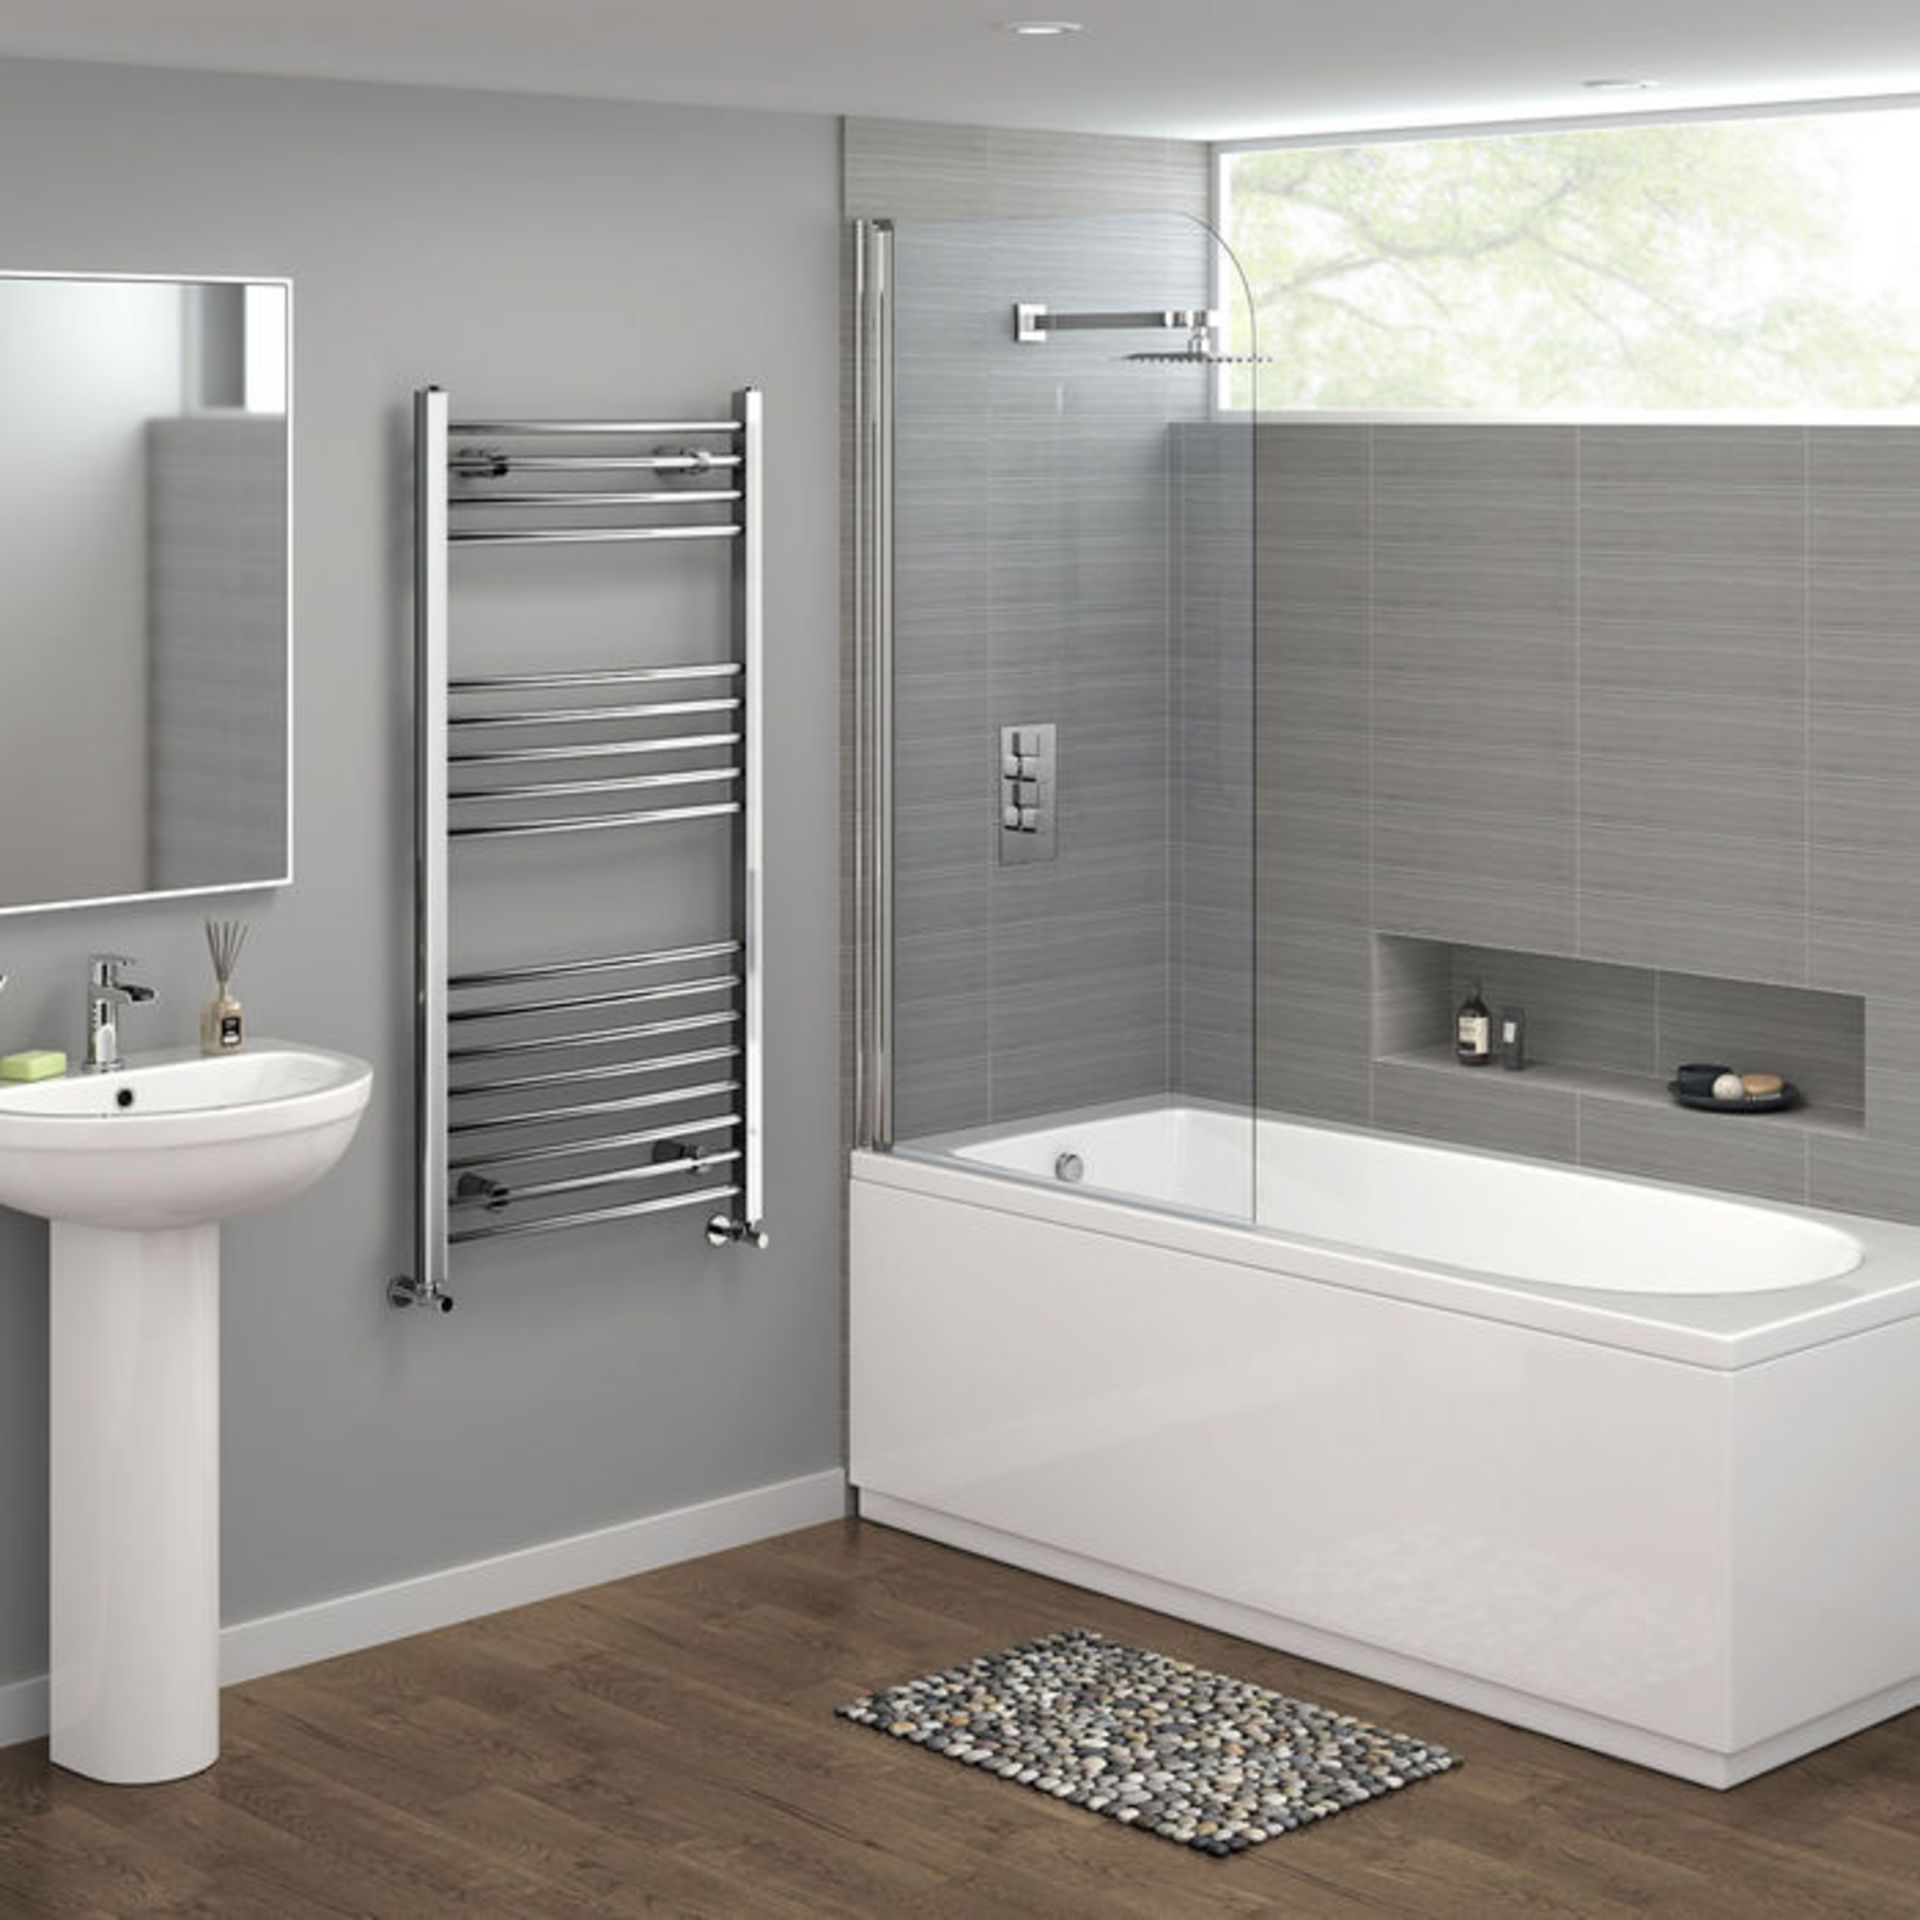 1200x600mm - 20mm Tubes - Chrome Curved Rail Ladder Towel Radiator.NC1200600. Made from chrom... - Image 2 of 2